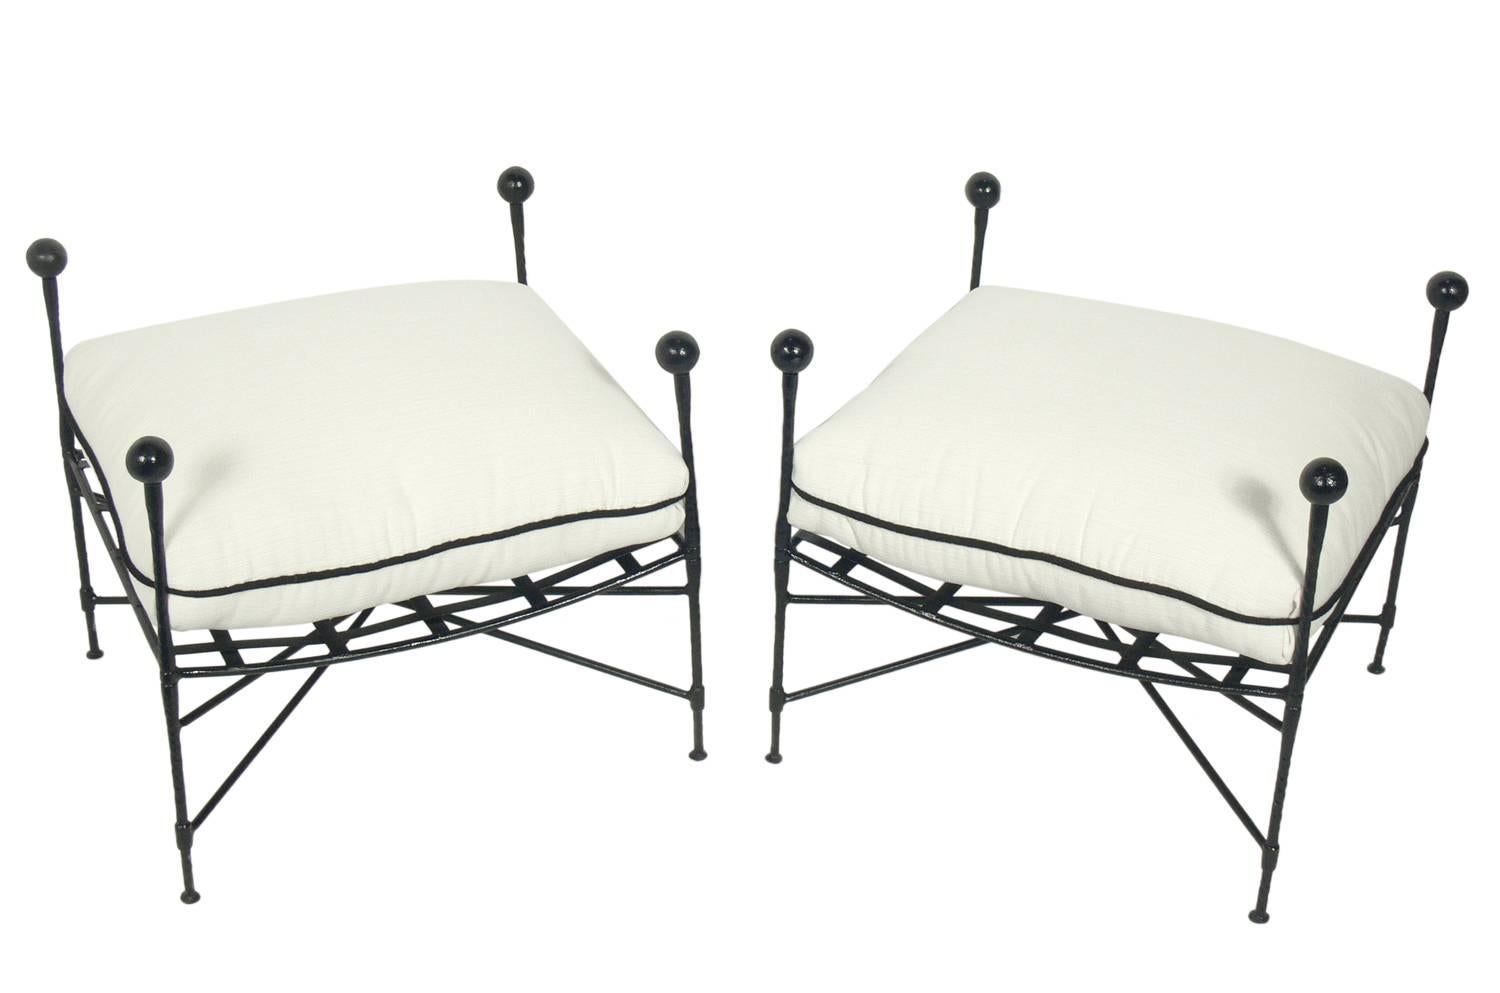 Pair of sculptural iron stools, designed by Mario Paper Zinin for Salterini, Italy, circa 1950s. They can be used indoors or outdoors. They have been completely restored with sunbrella outdoor grade fabric and outdoor dacron filling in the cushions.